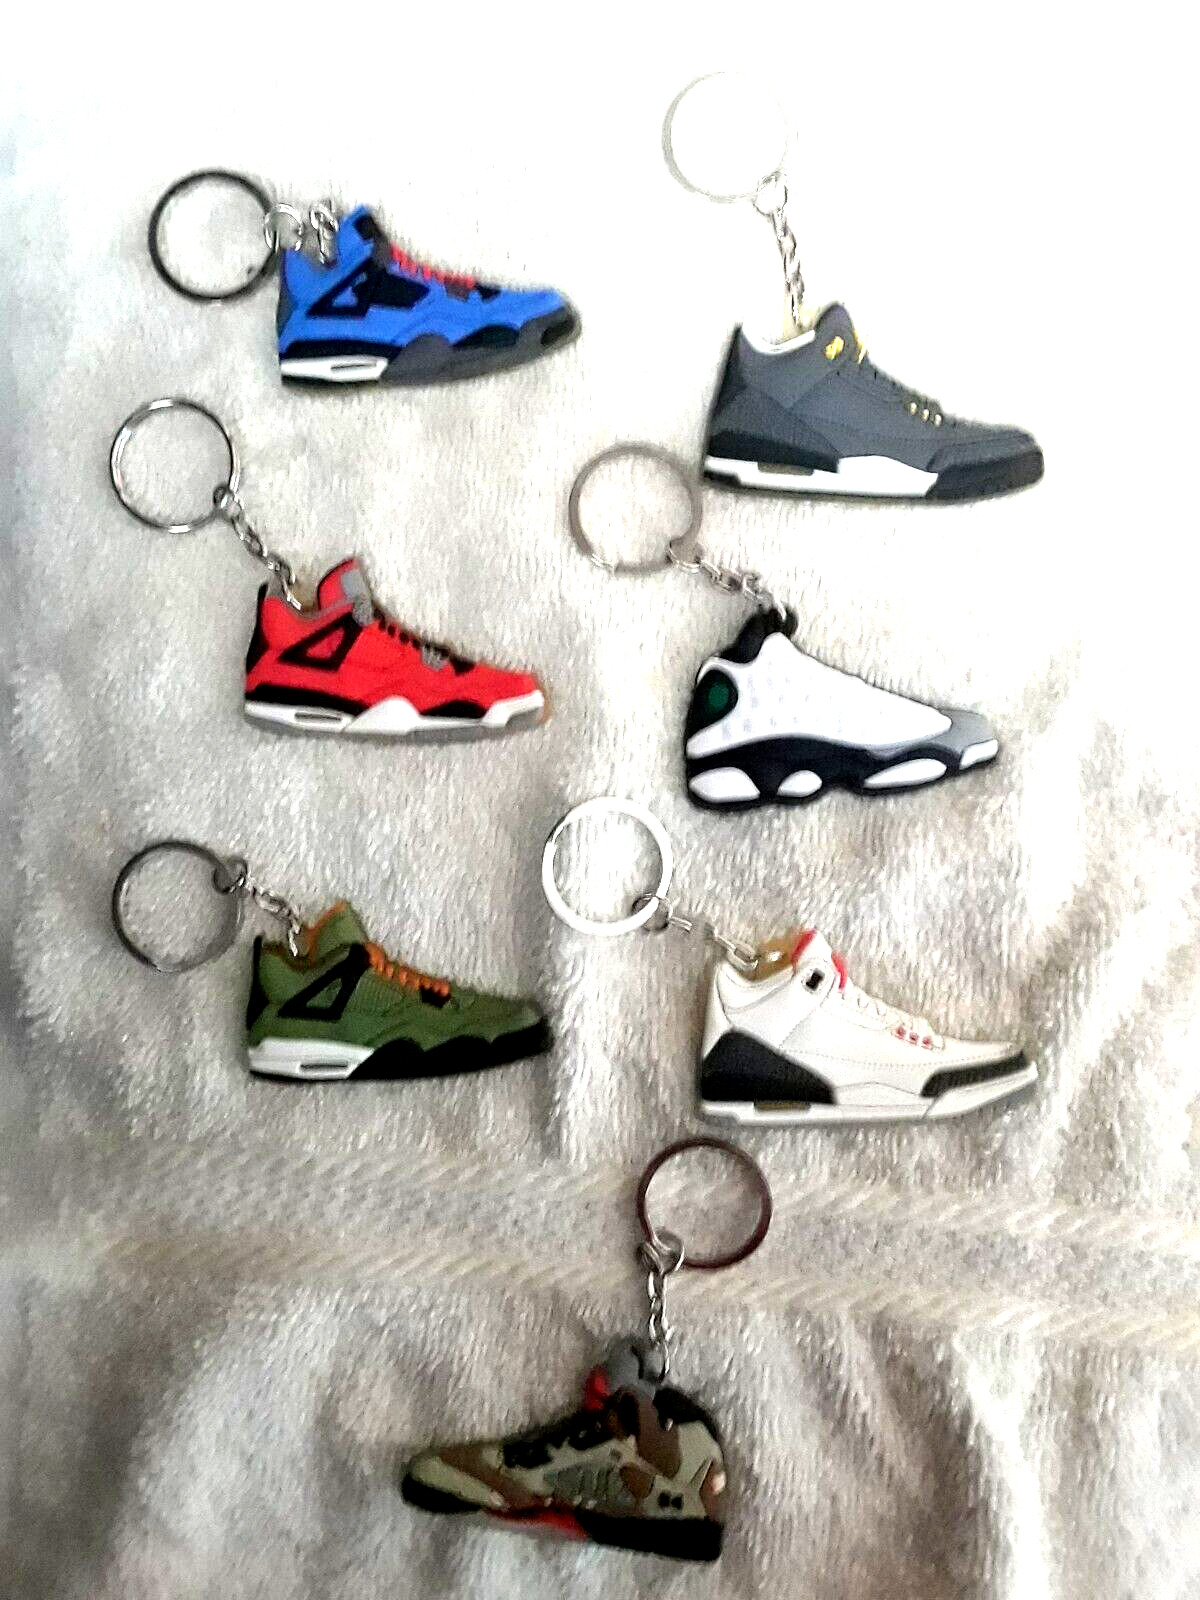 Lot of 7 Assorted Sneaker Keychains 2.5 inches long New